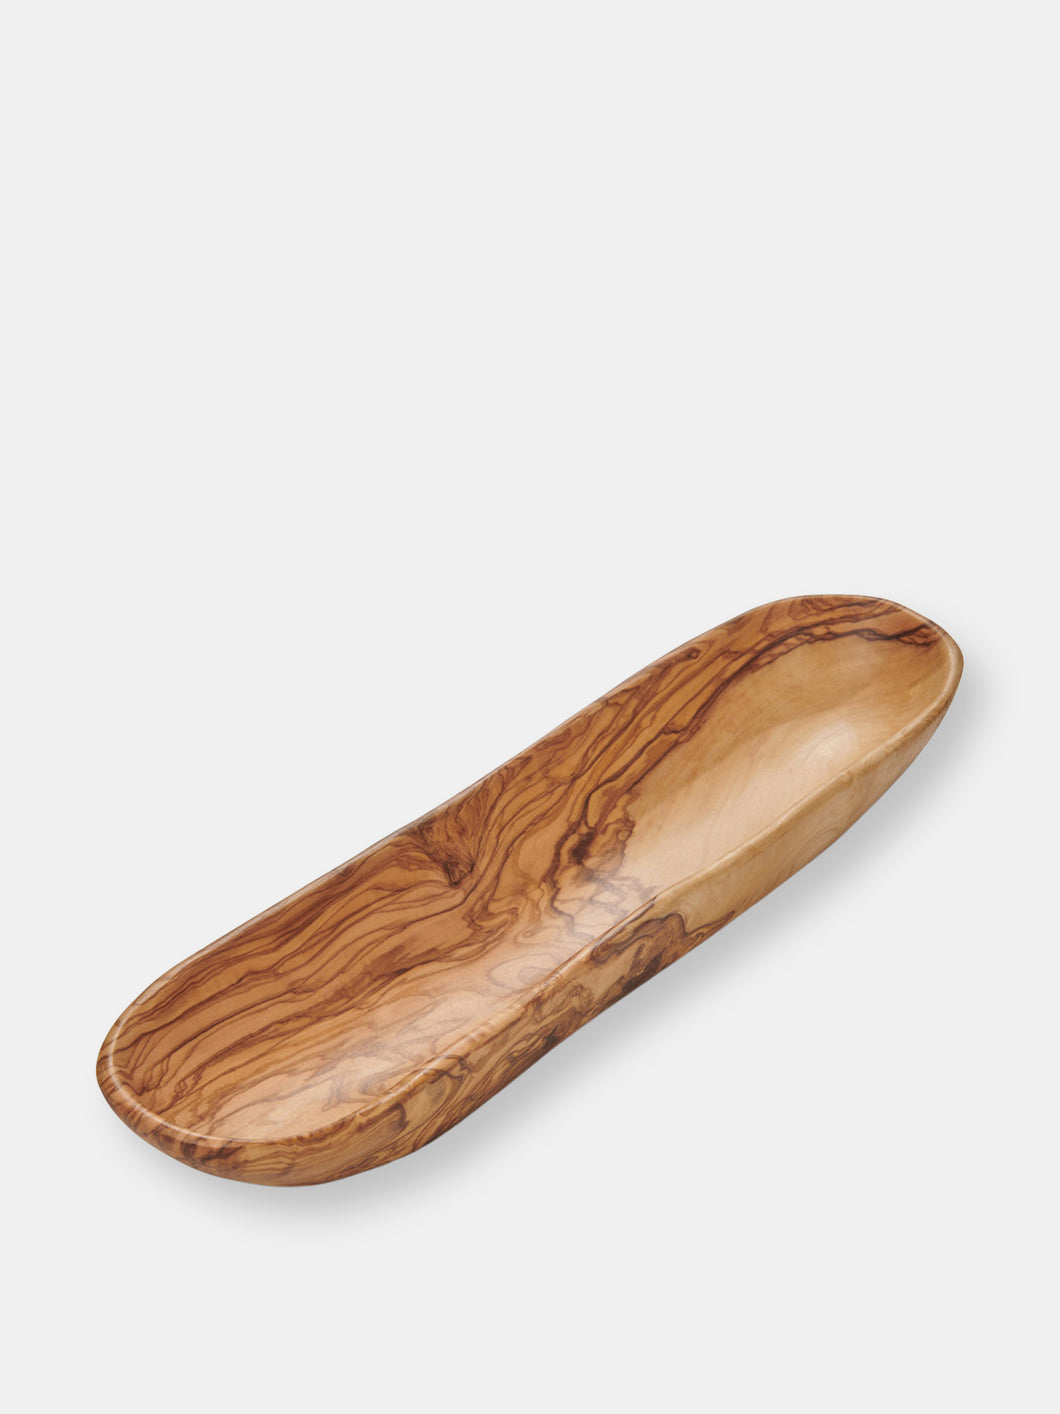 Berard Olive Wood Bread Serving Tray